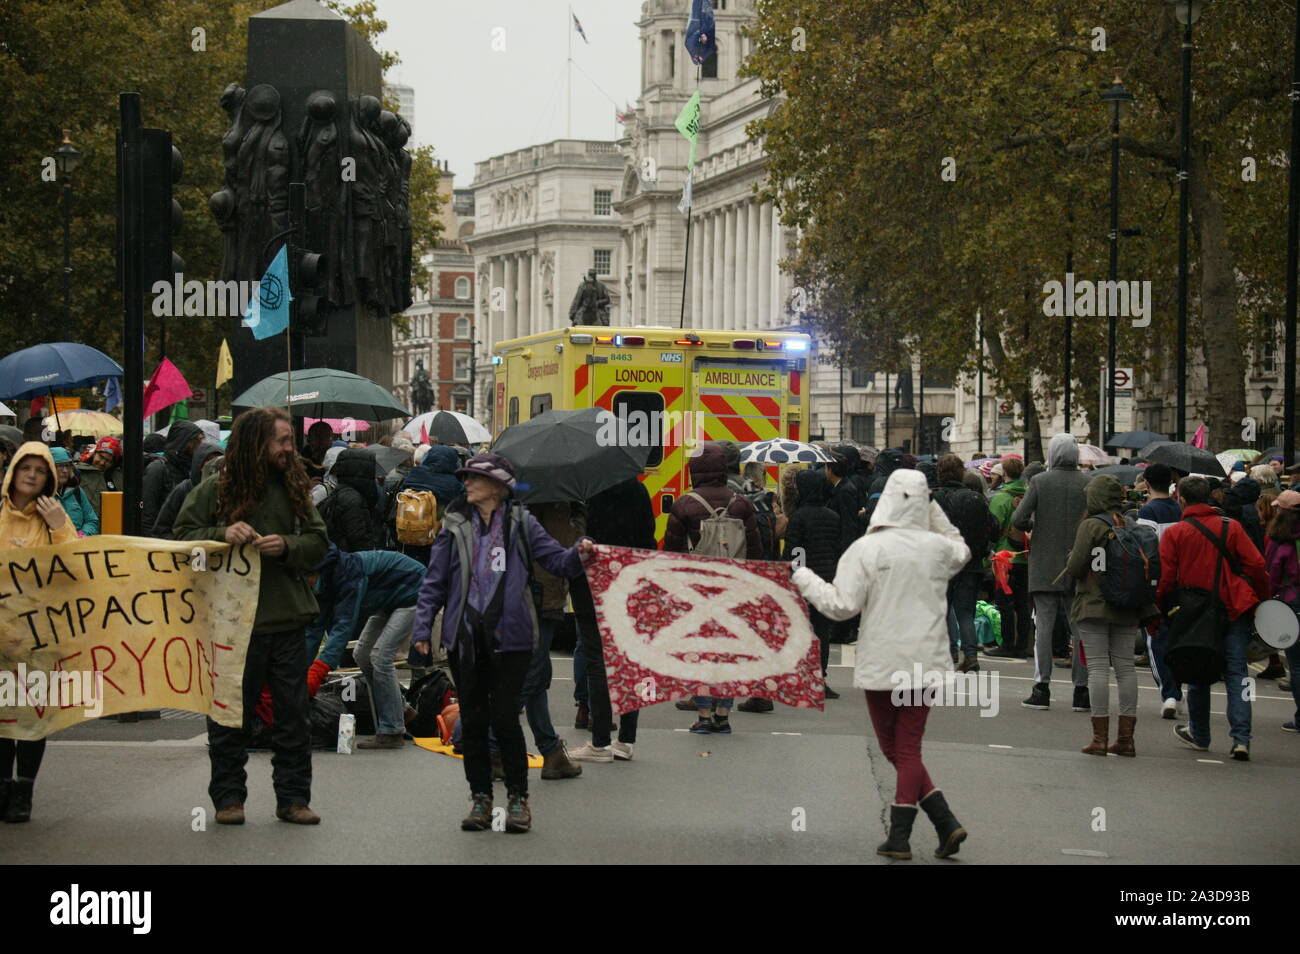 LONDON, UNITED KINGDOM. 07th Oct 2019, Ambulance Delayed by the Extinction Rebellion protest in Downing Street, to highlight climate change. © Martin Foskett/Knelstrom Ltd/Alamy Live News Stock Photo